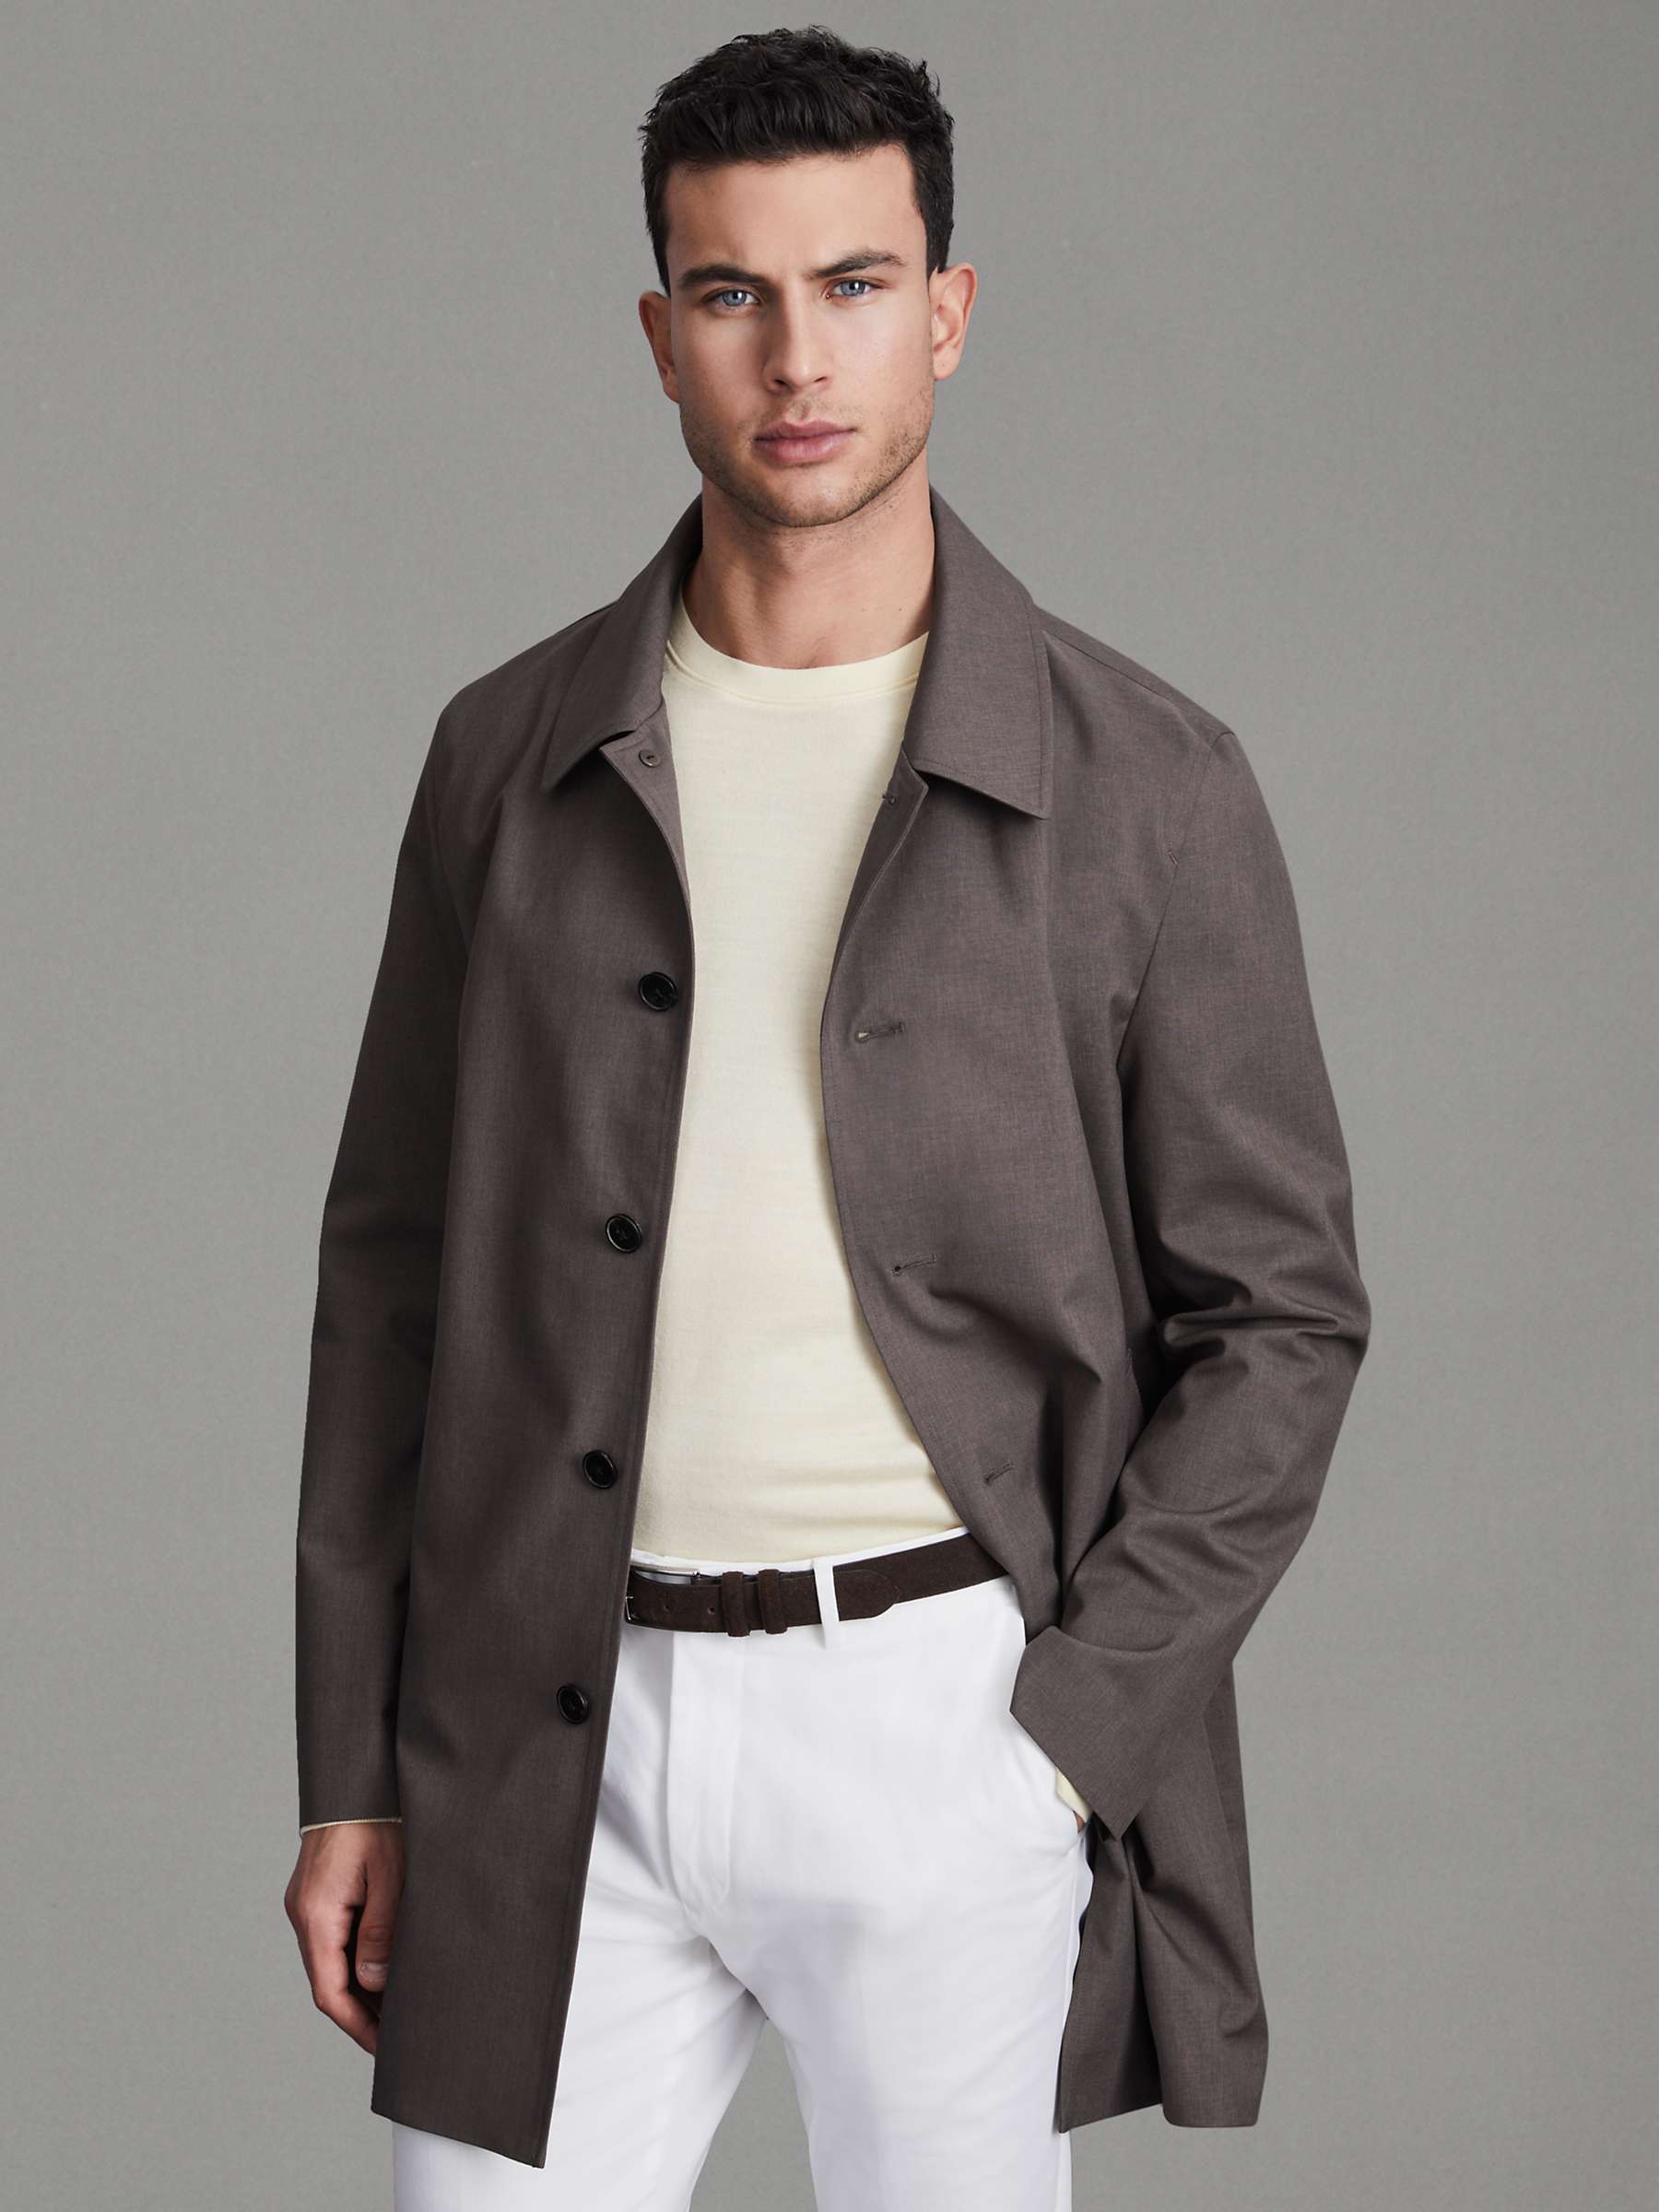 Buy Reiss Perrin Removable Funnel Neck Insert Mac Online at johnlewis.com